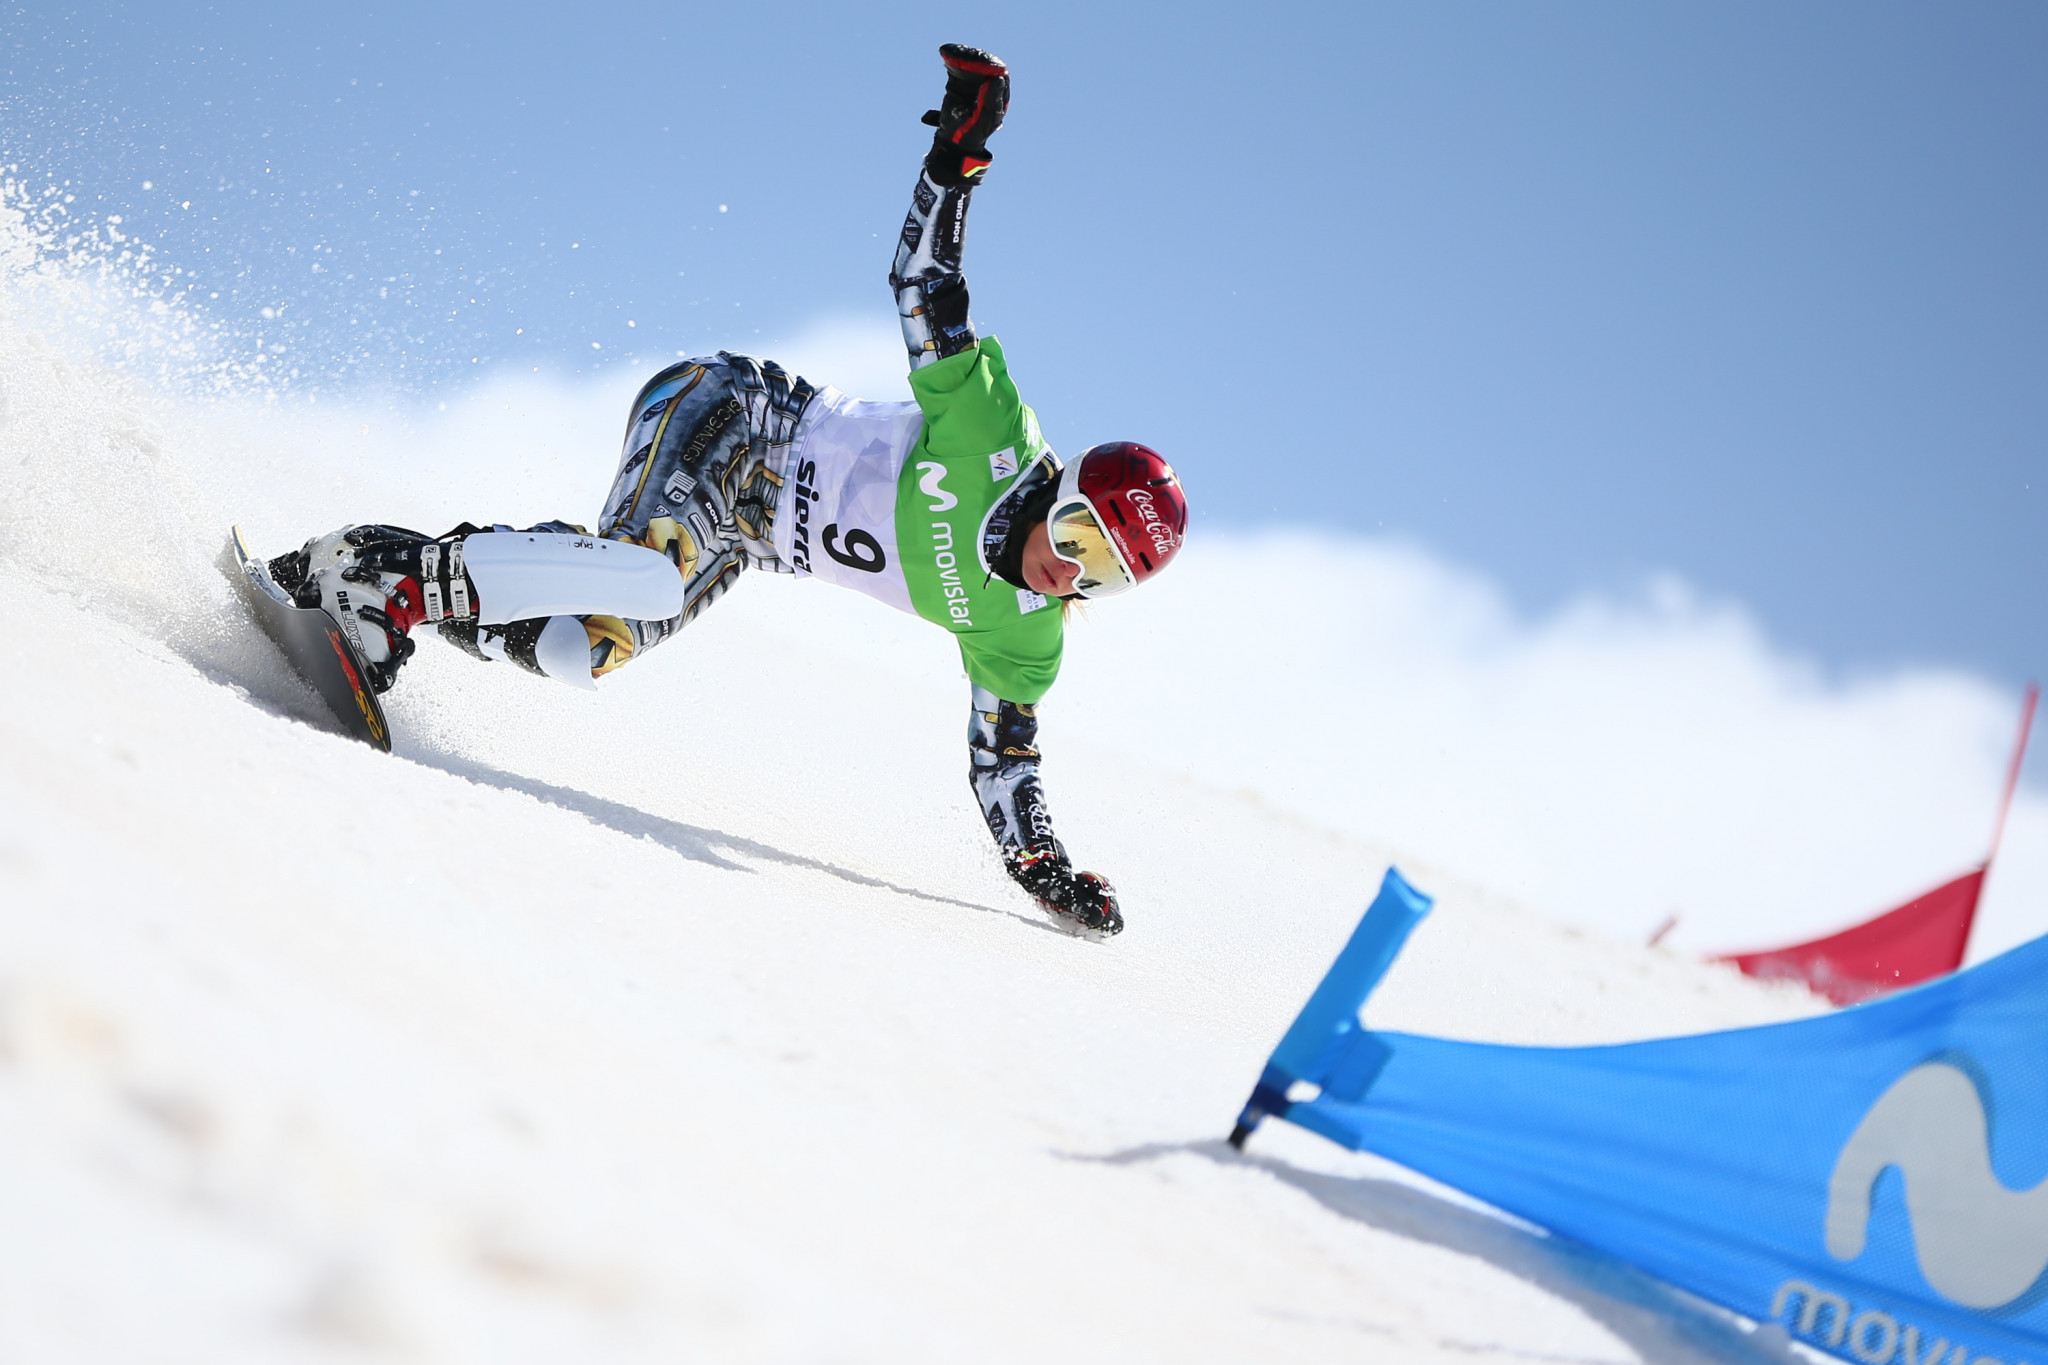 Bad Gastein set to host FIS Snowboard World Cup for 18th consecutive year